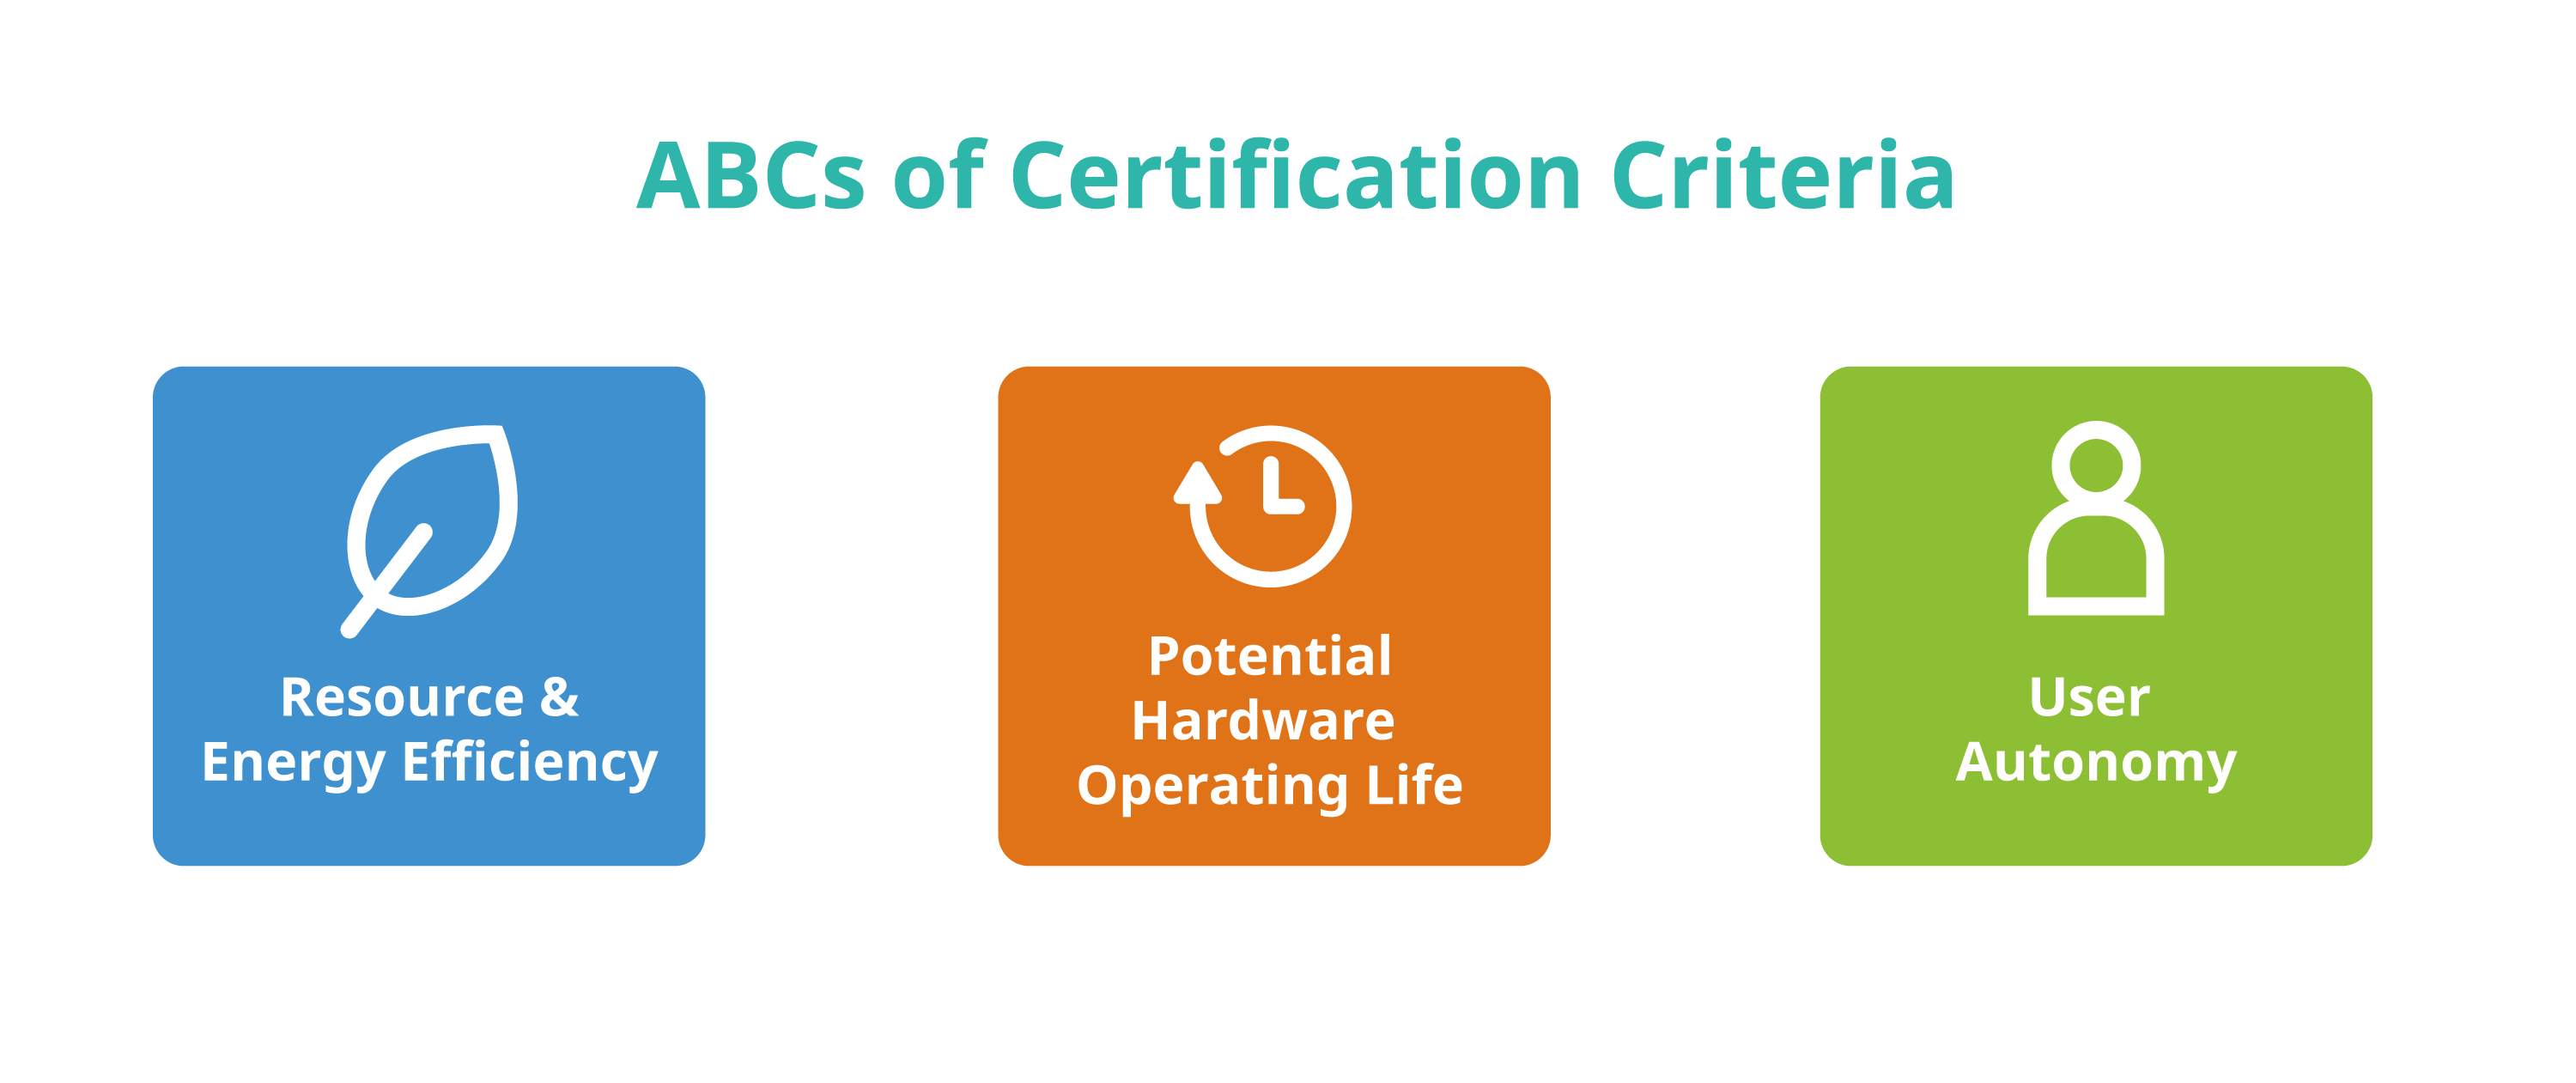 The ABCs of the award criteria. (Image from KDE published under a <a href="https://spdx.org/licenses/CC-BY-SA-4.0.html">CC-BY-SA-4.0</a> license. <a href="https://thenounproject.com/icon/time-2496474/">Time</a> icon by Adrien Coquet licensed under a <a href="https://spdx.org/licenses/CC-BY-3.0.html">CC-BY</a> license. Design by Lana Lutz.)